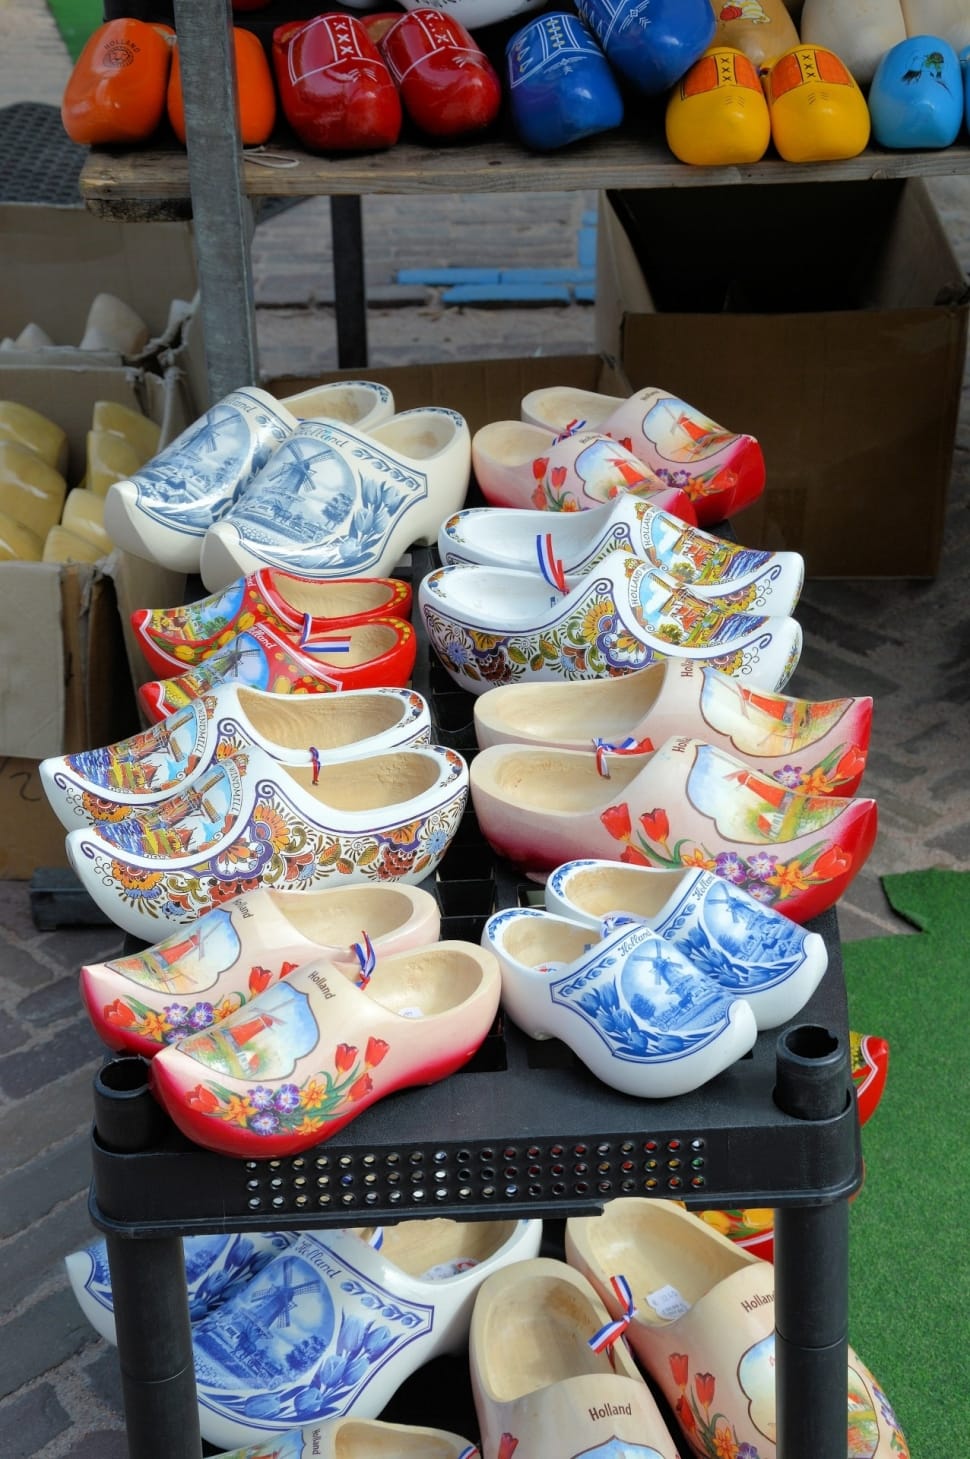 Tradition, Holland, Tourism, Clogs, large group of objects, choice preview